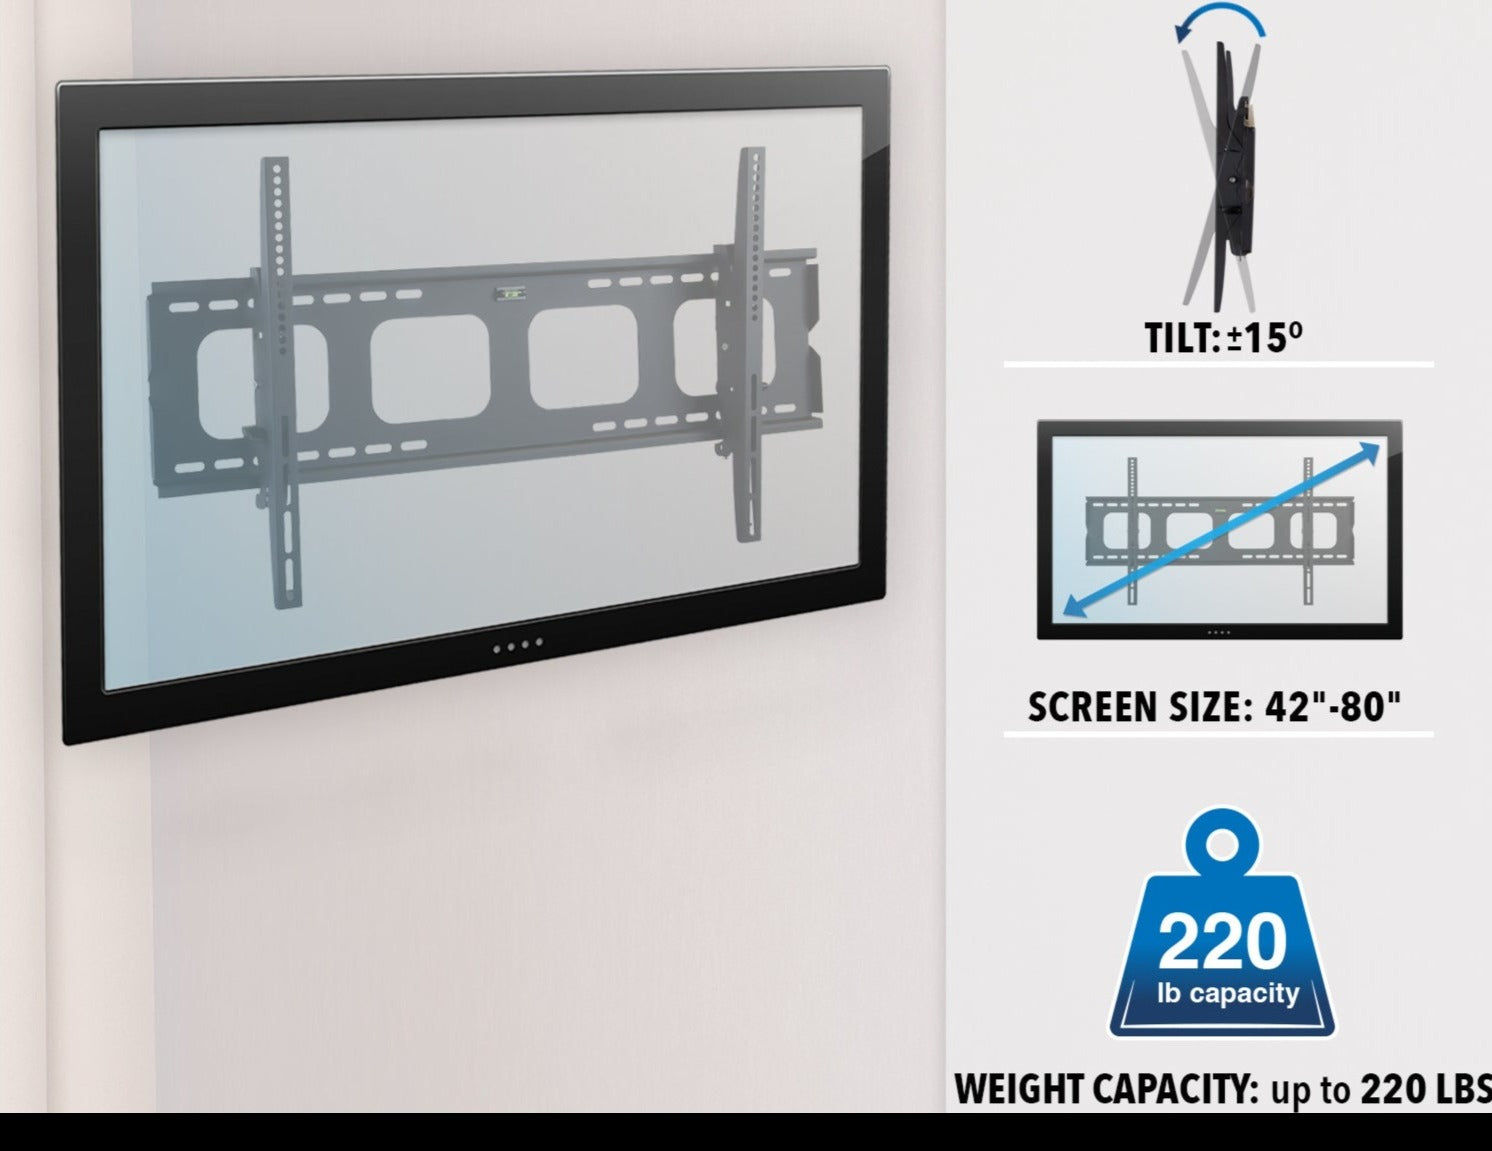 Heavy-Duty Low-Profile Tilting and Locking Wall Mount - 220lb Capacity